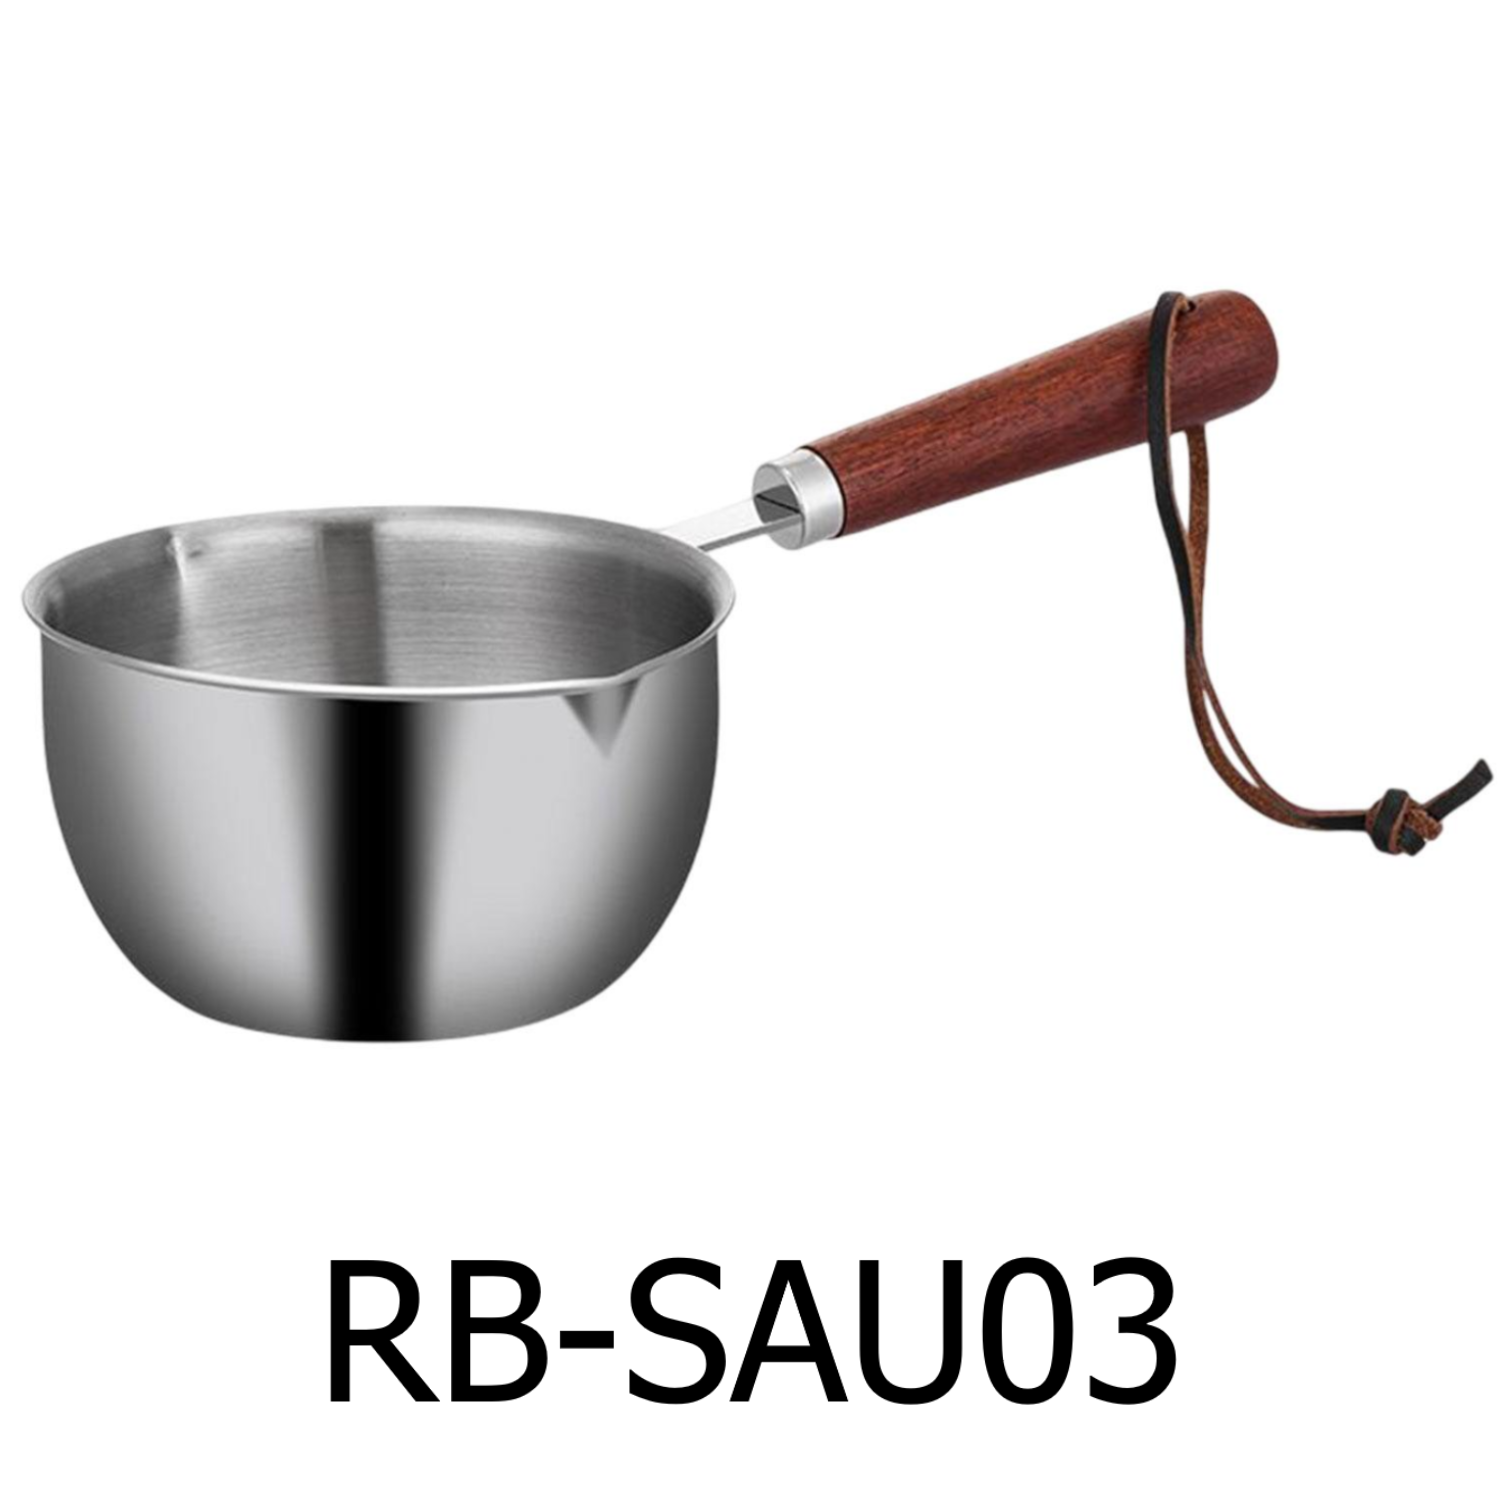 Small Butter Chocolate Melting Pot Saucepan With Pour Spout